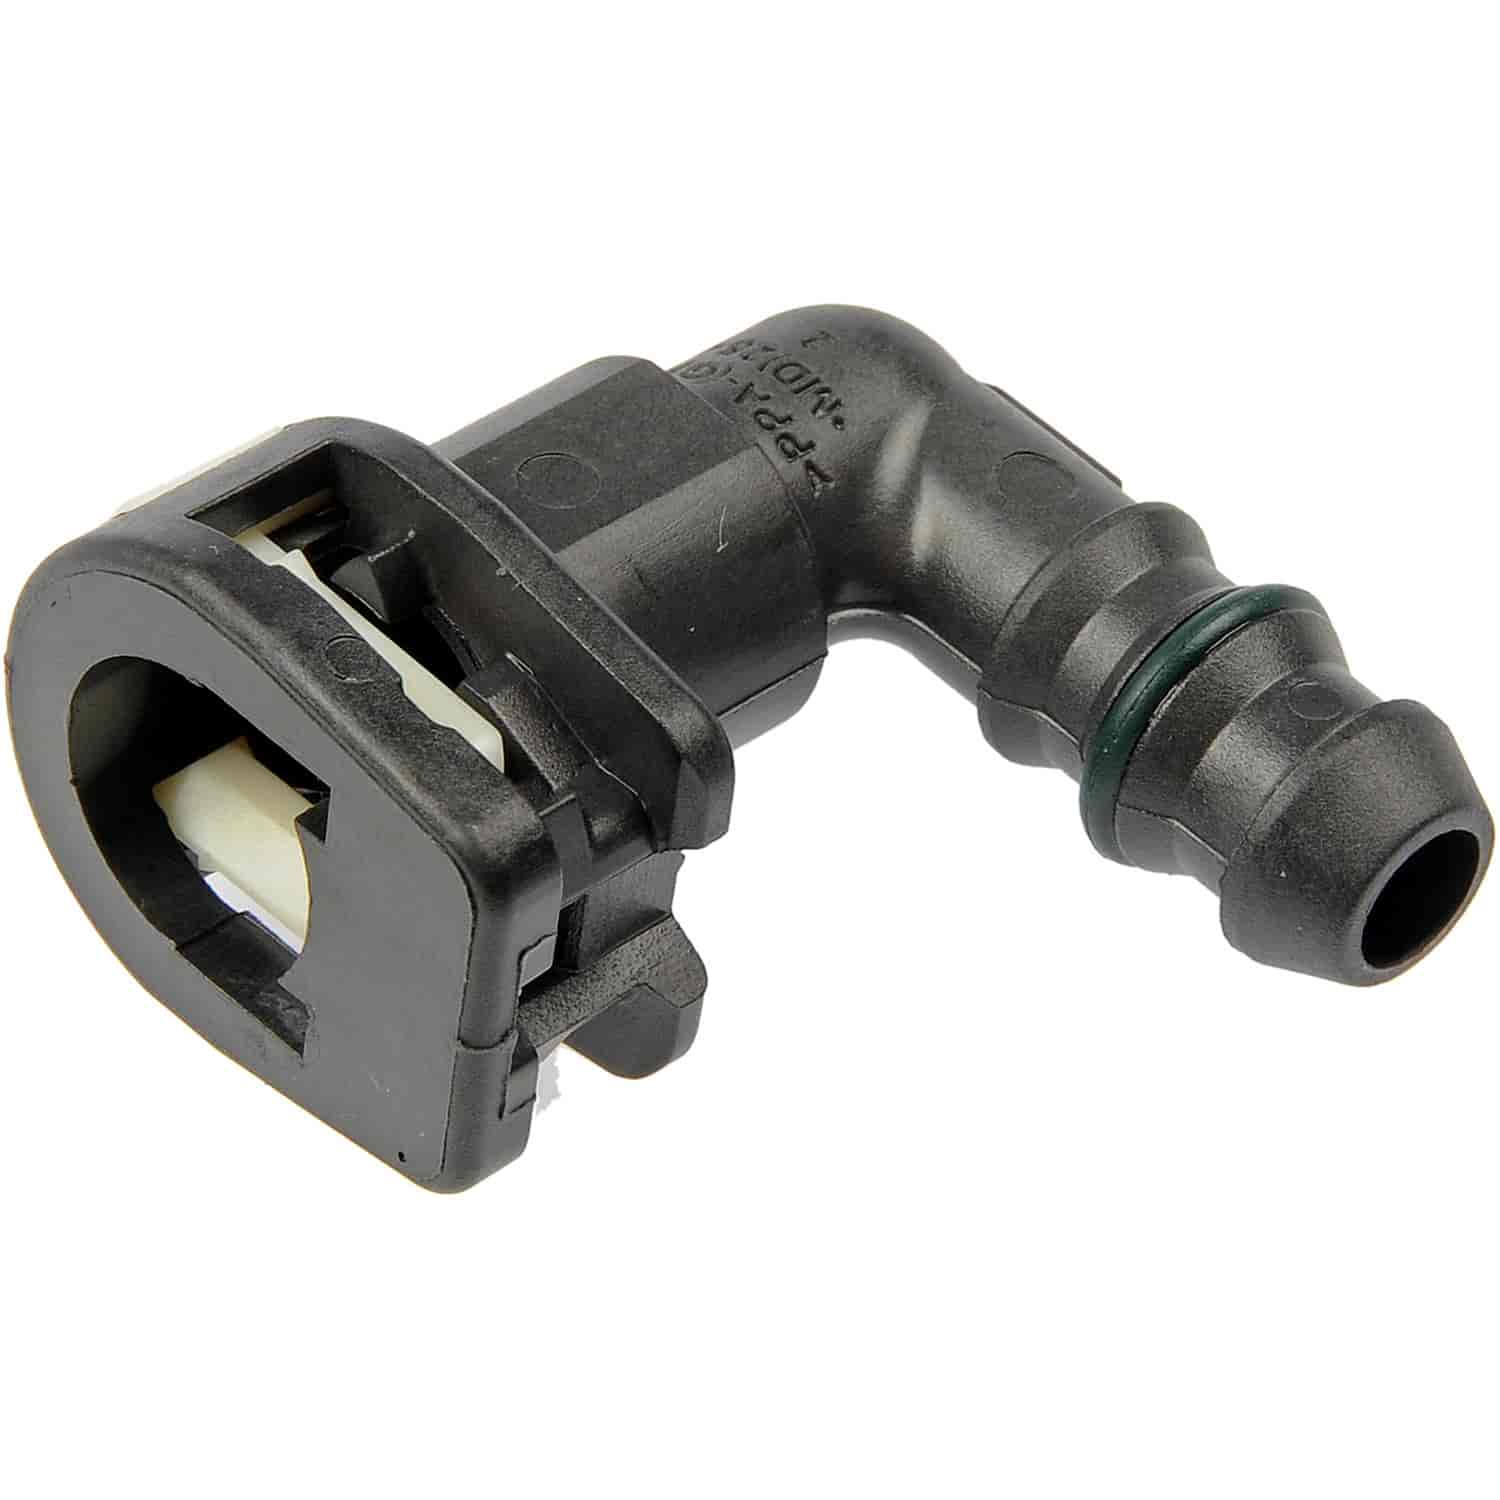 FUEL LINE CONNECTOR 5/16 IN. STEEL TO 3/8 IN. NYLON W/ 90 DEGREE BEND